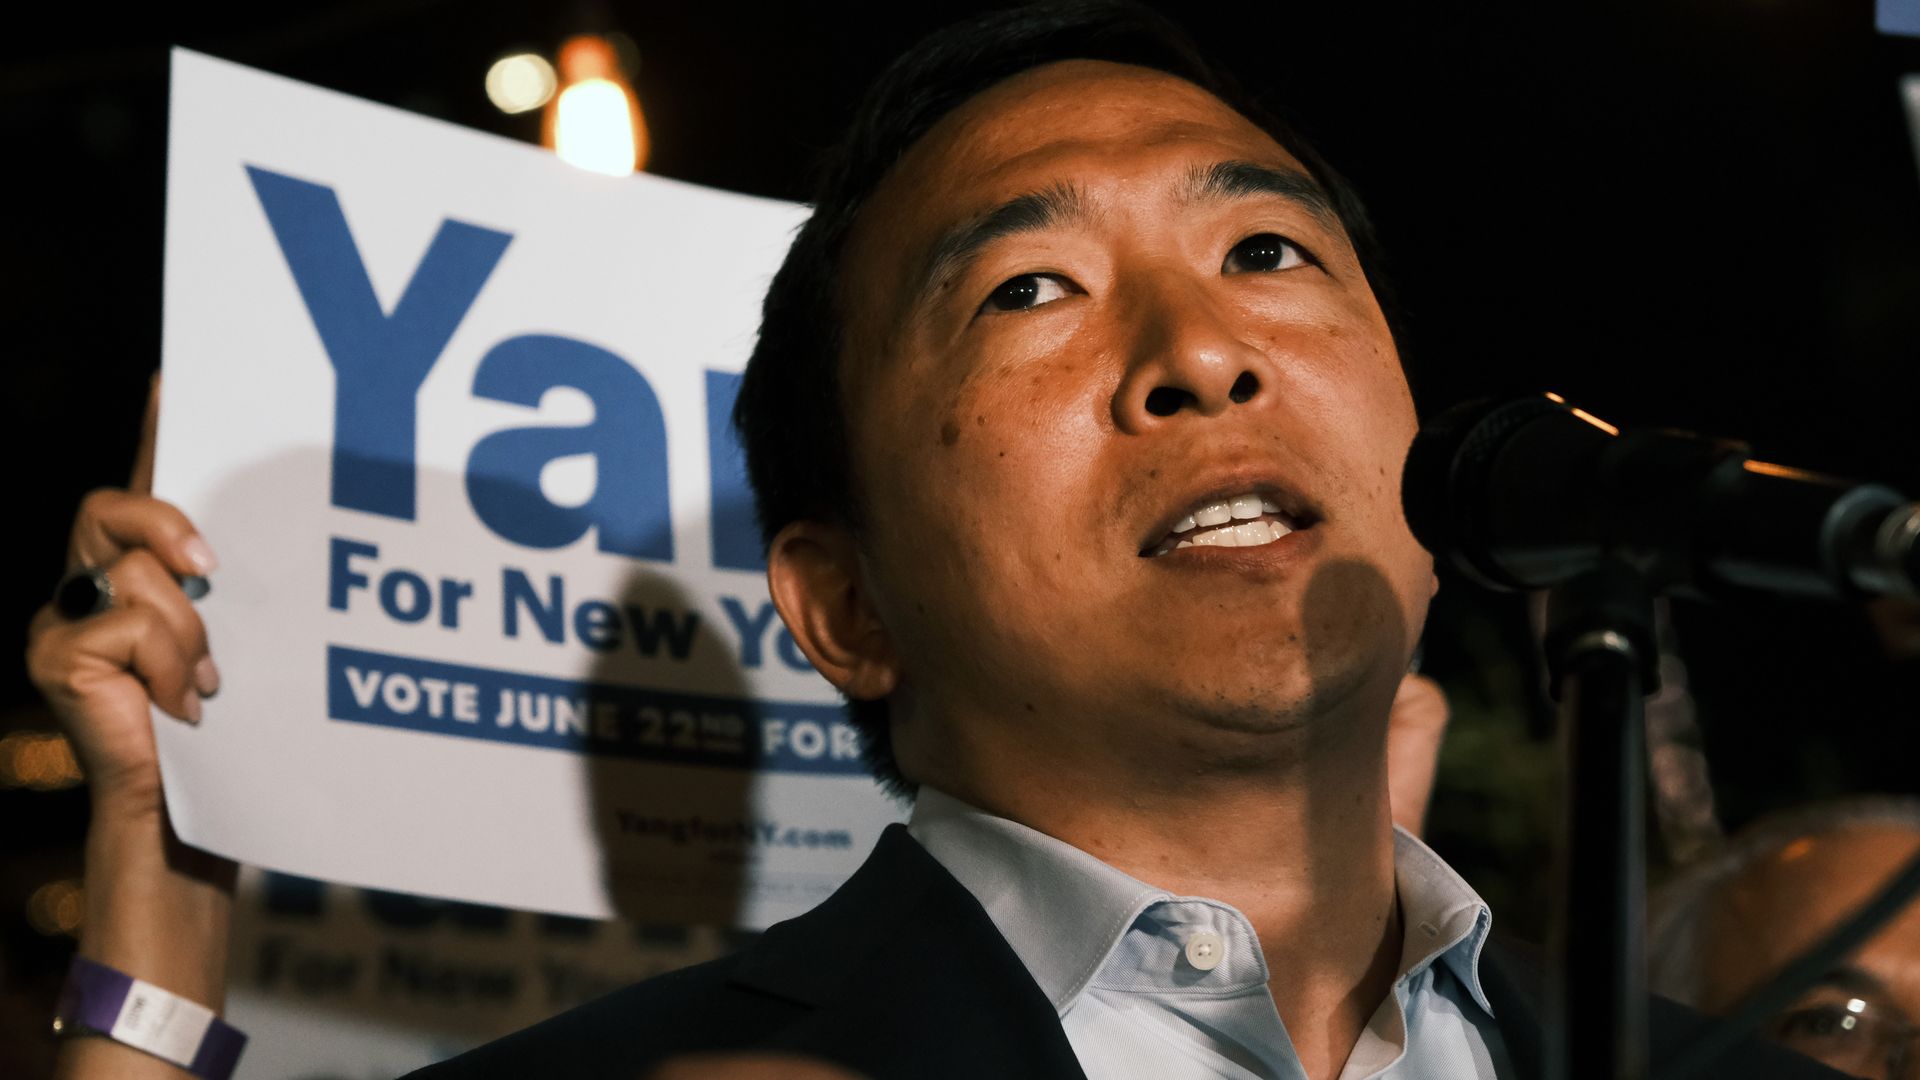  Mayoral candidate Andrew Yang greets supporters at a Manhattan hotel as he concedes in his campaign for mayor on June 22, 2021 in New York City. 